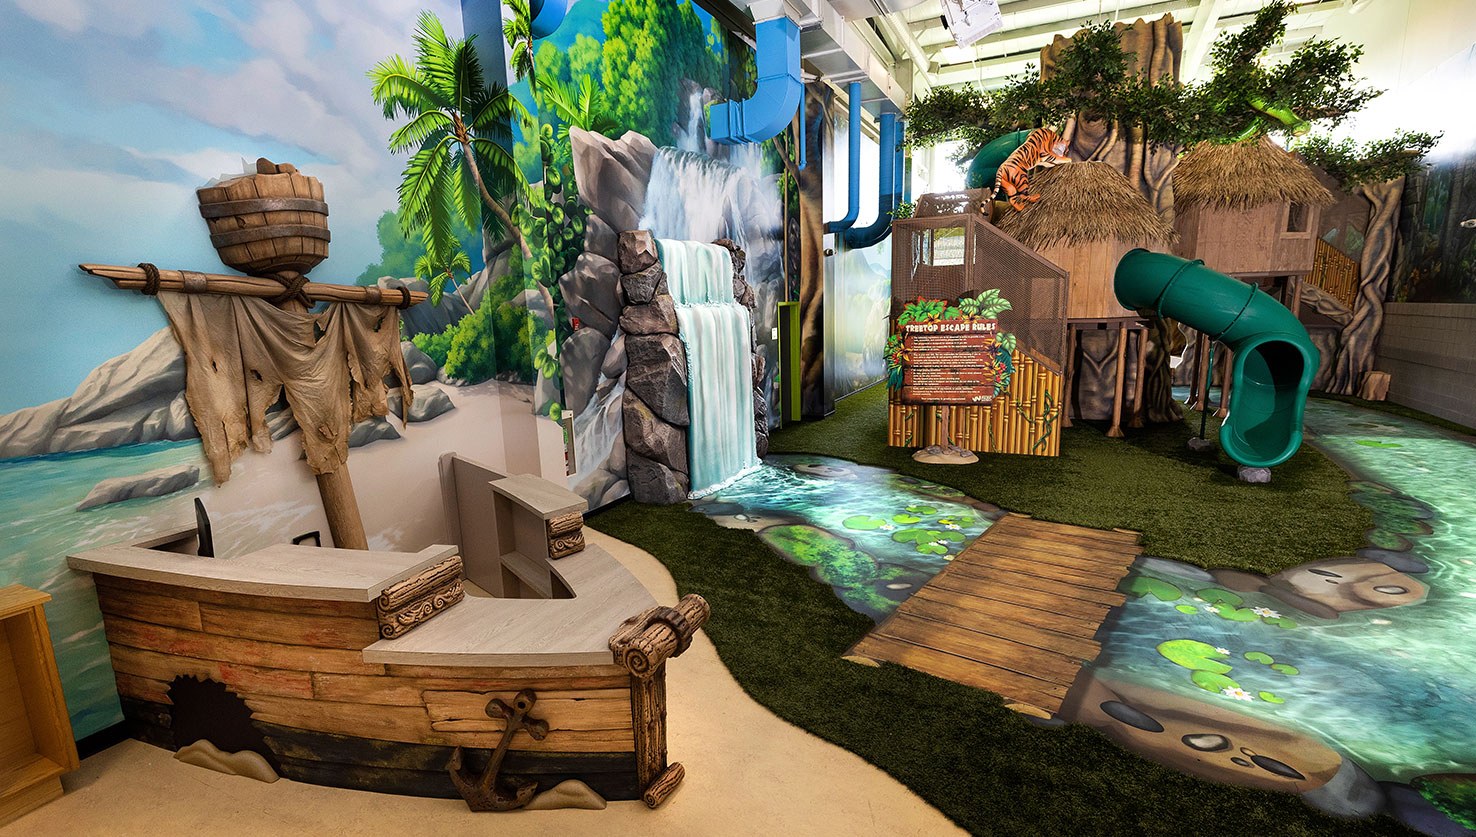 Image features shipwreck check-in desk, waterfall and treehouse with slides at West Chicago Parks District ARC Center